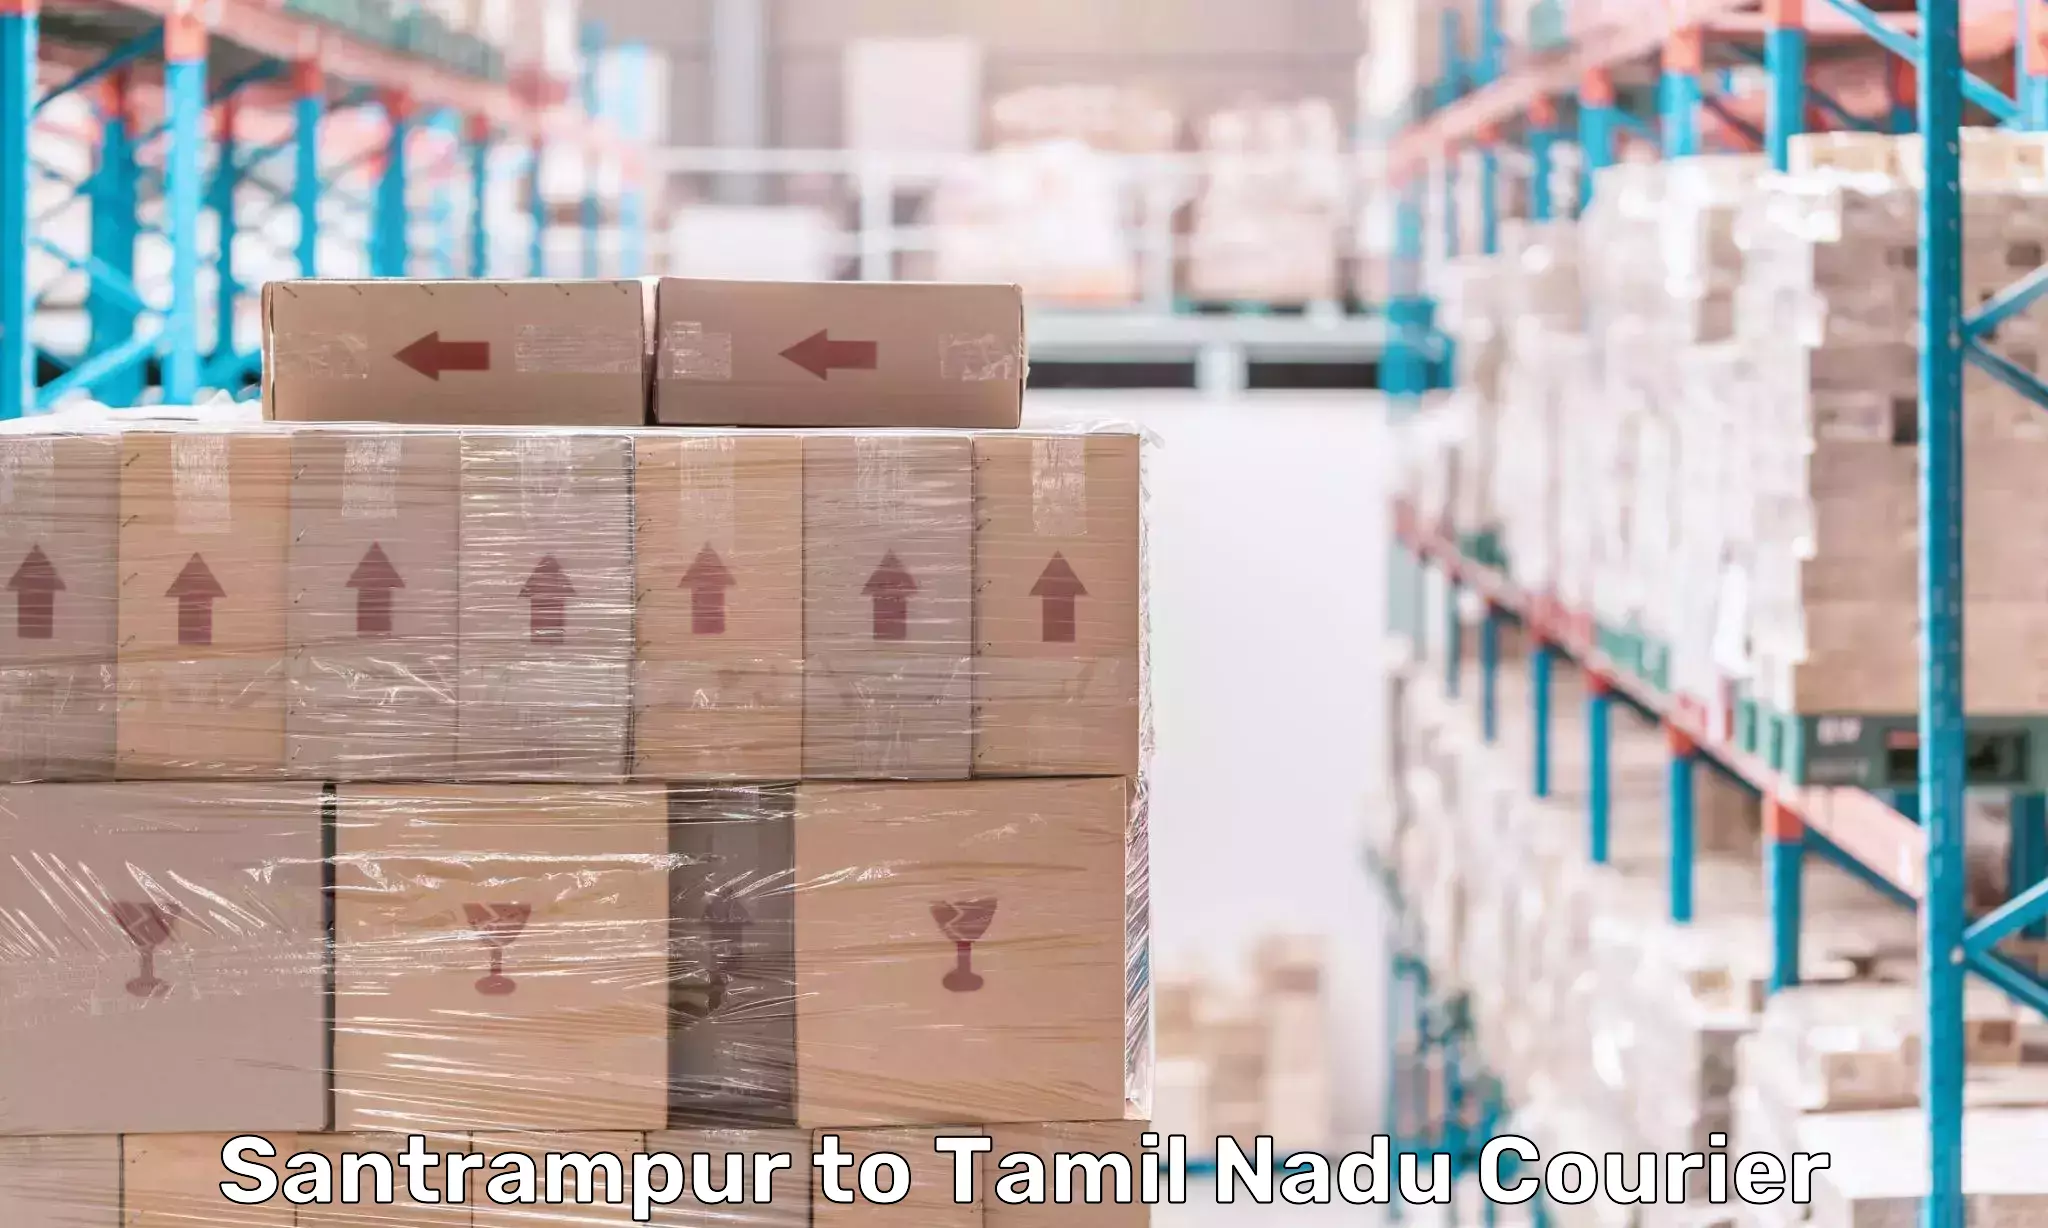 Same-day delivery solutions Santrampur to Tirunelveli